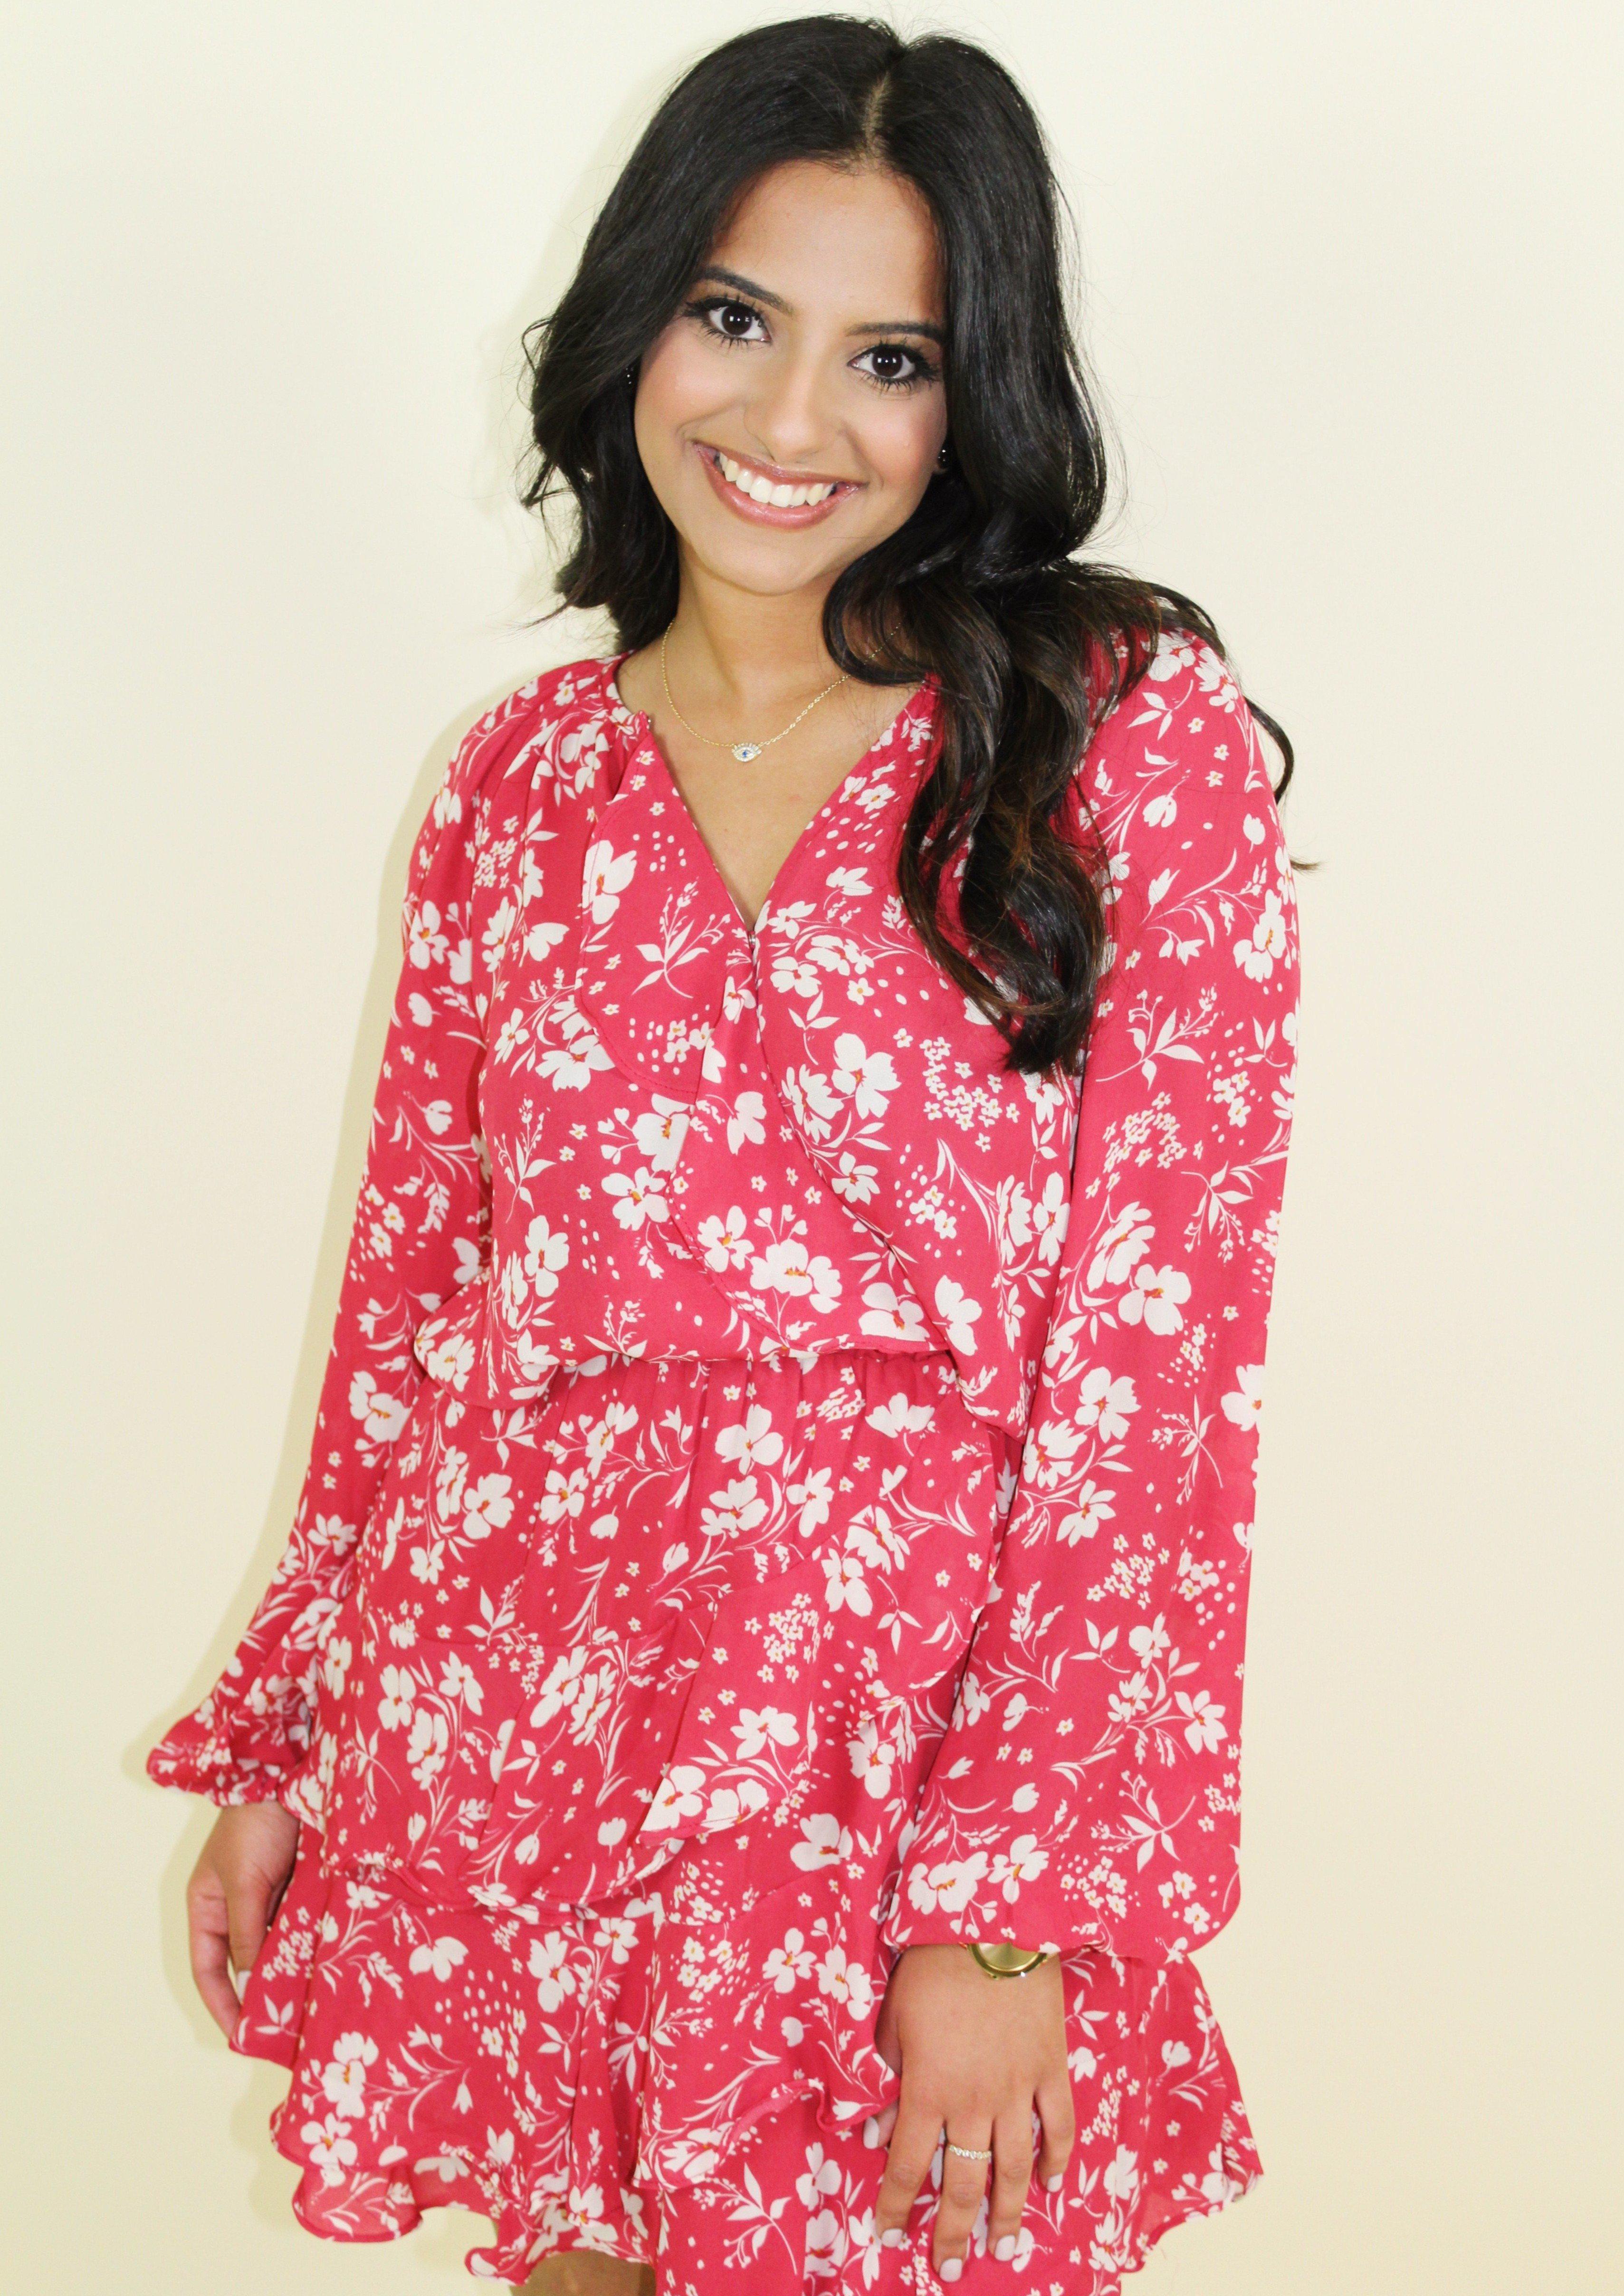 The Floral Print Ruffled Dress